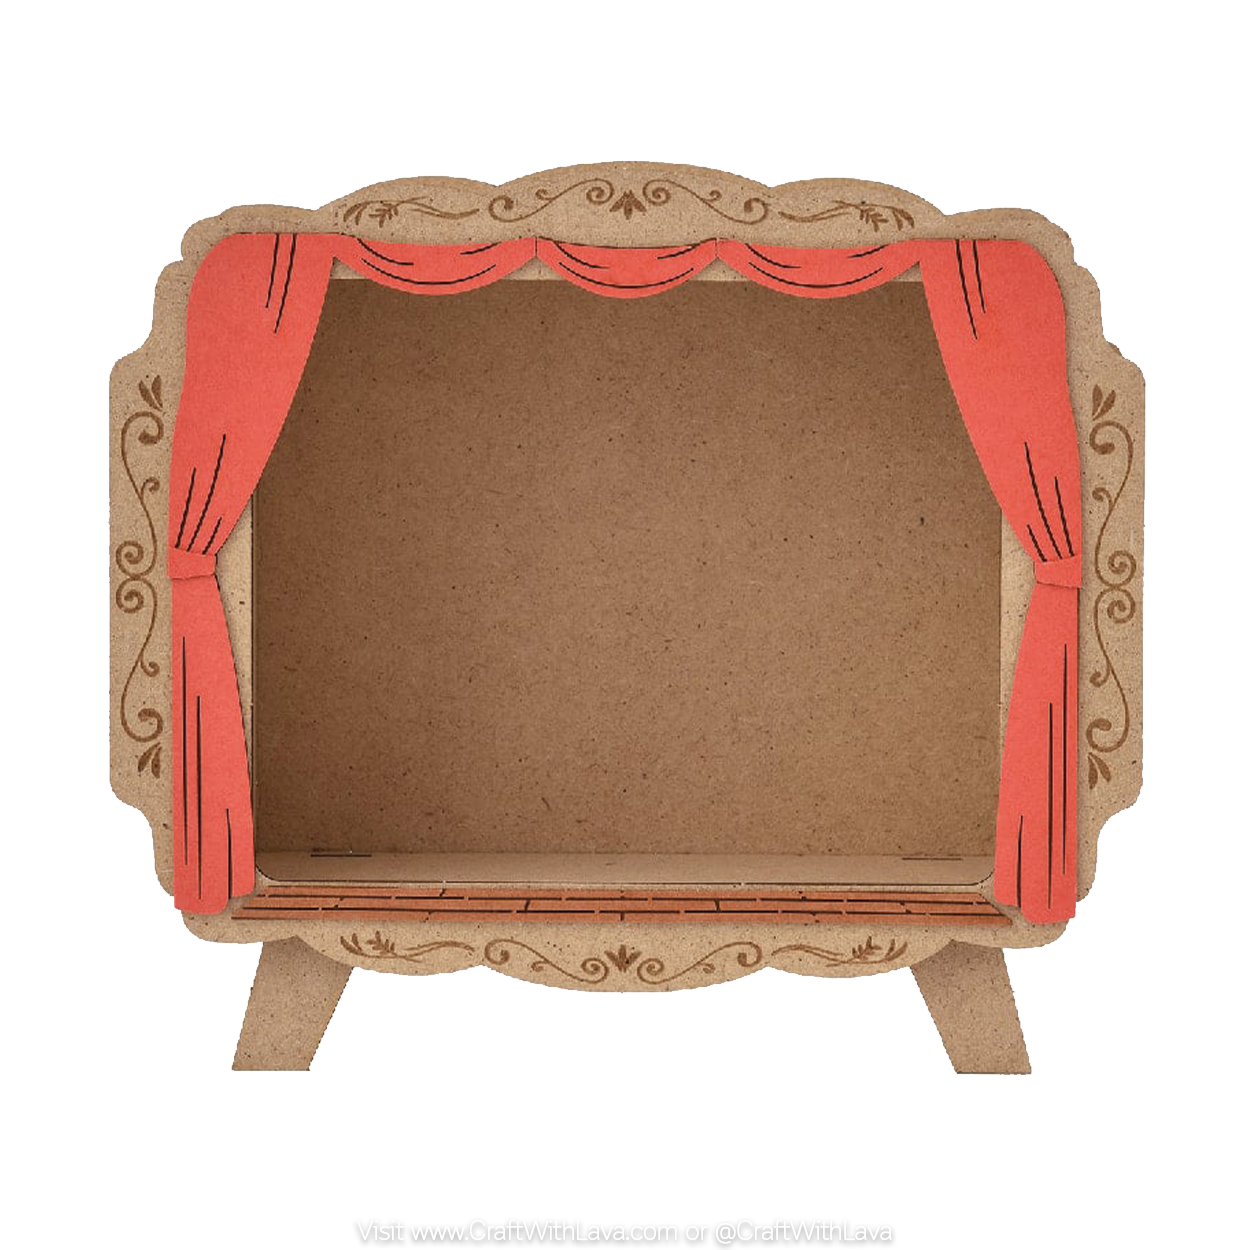 Accessories | Paper Theater Deco Frame | Theater